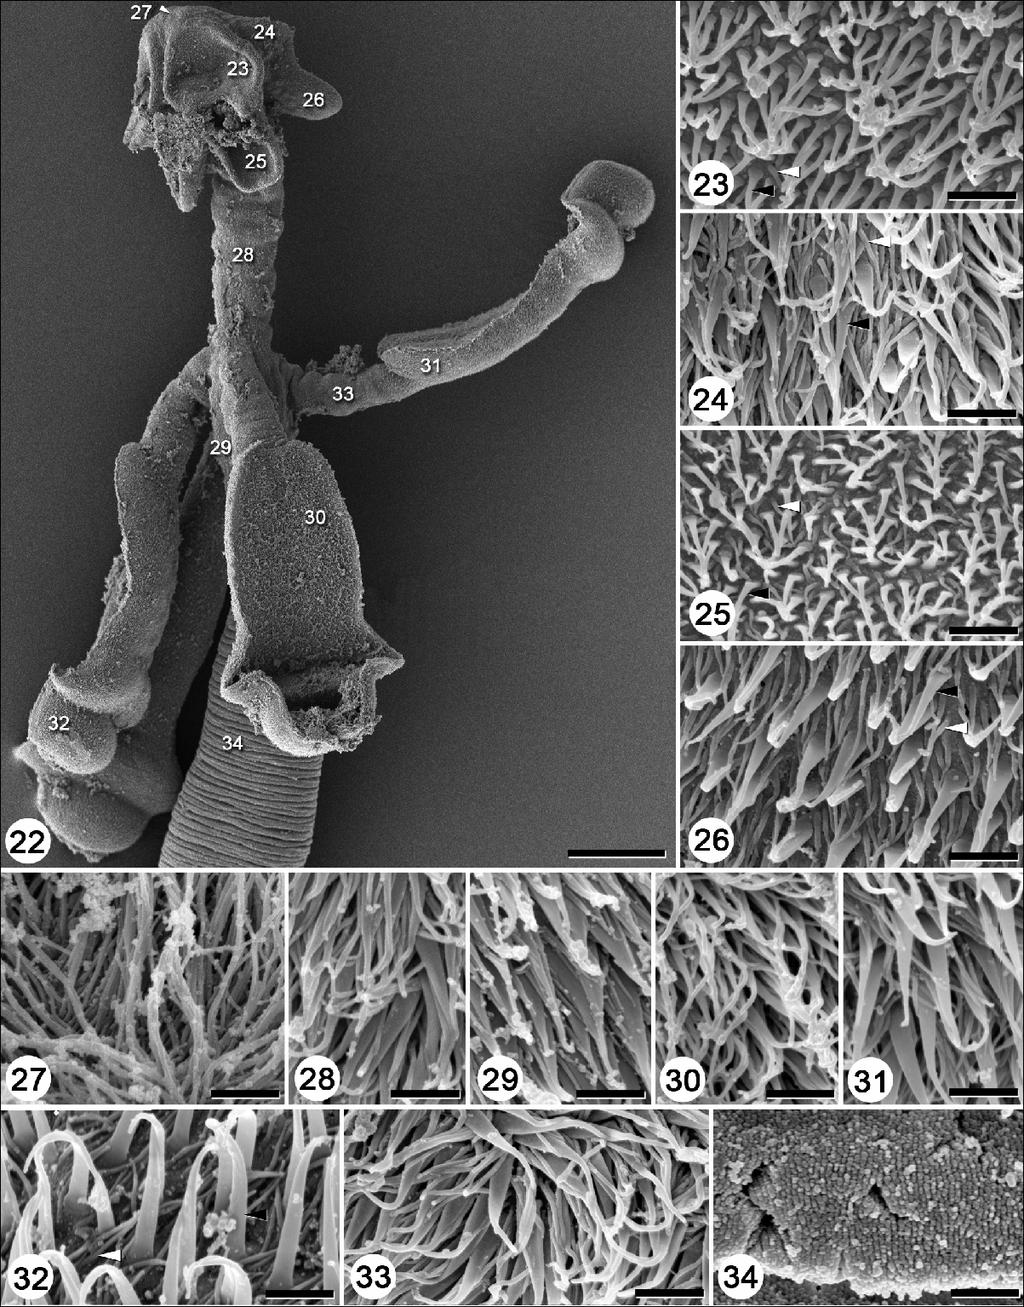 Figs. 22 34. Scanning electron micrographs of Rhoptrobothrium chongi sp. n. Fig. 22. Scolex. Note: Numbers correspond to the figures showing higher magnification images of these surfaces. Fig. 23.